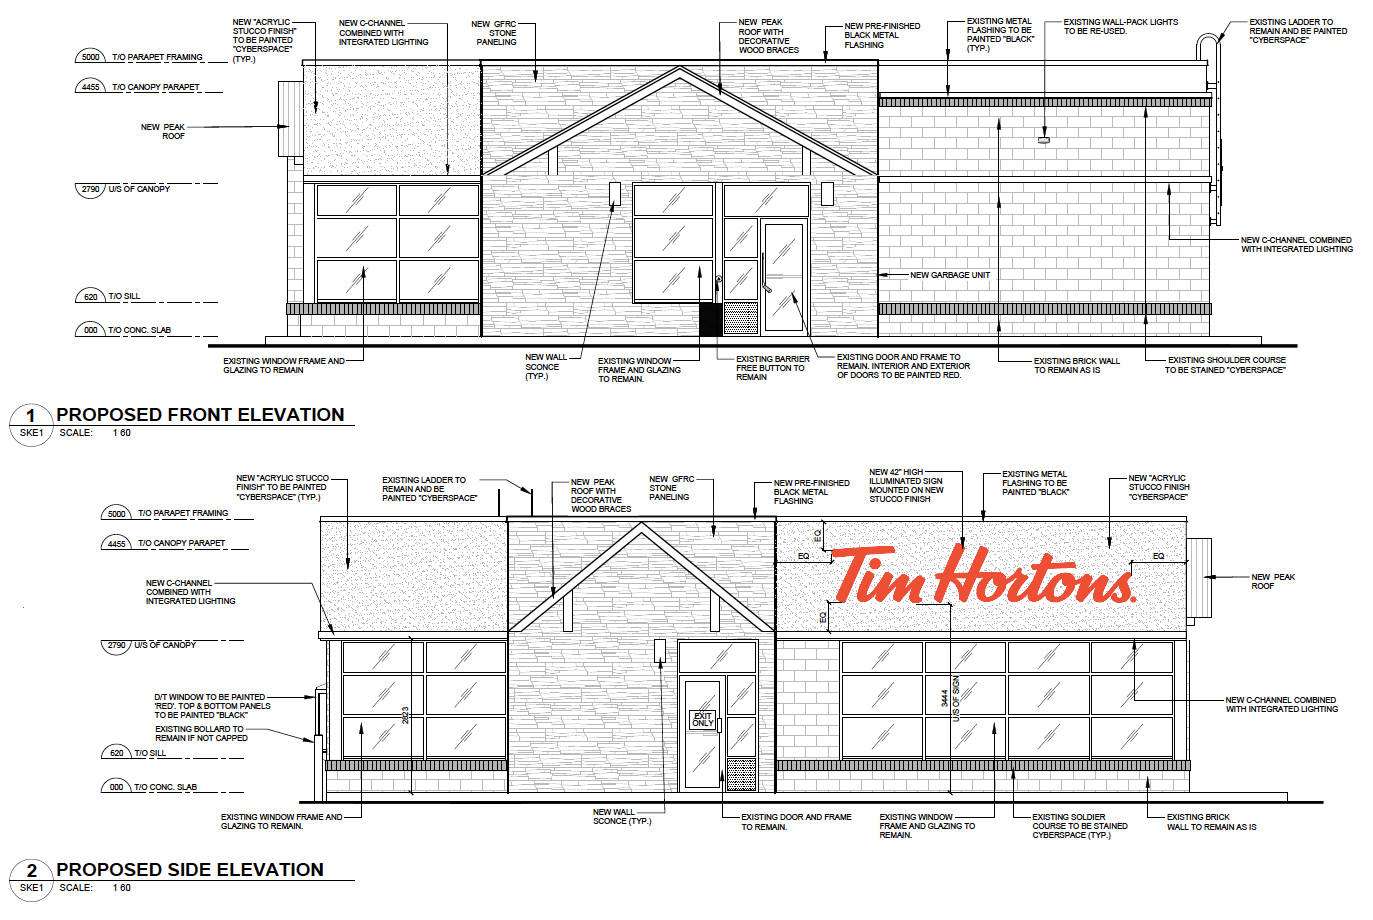 Tim Hortons location plans to debut in Newnan, News